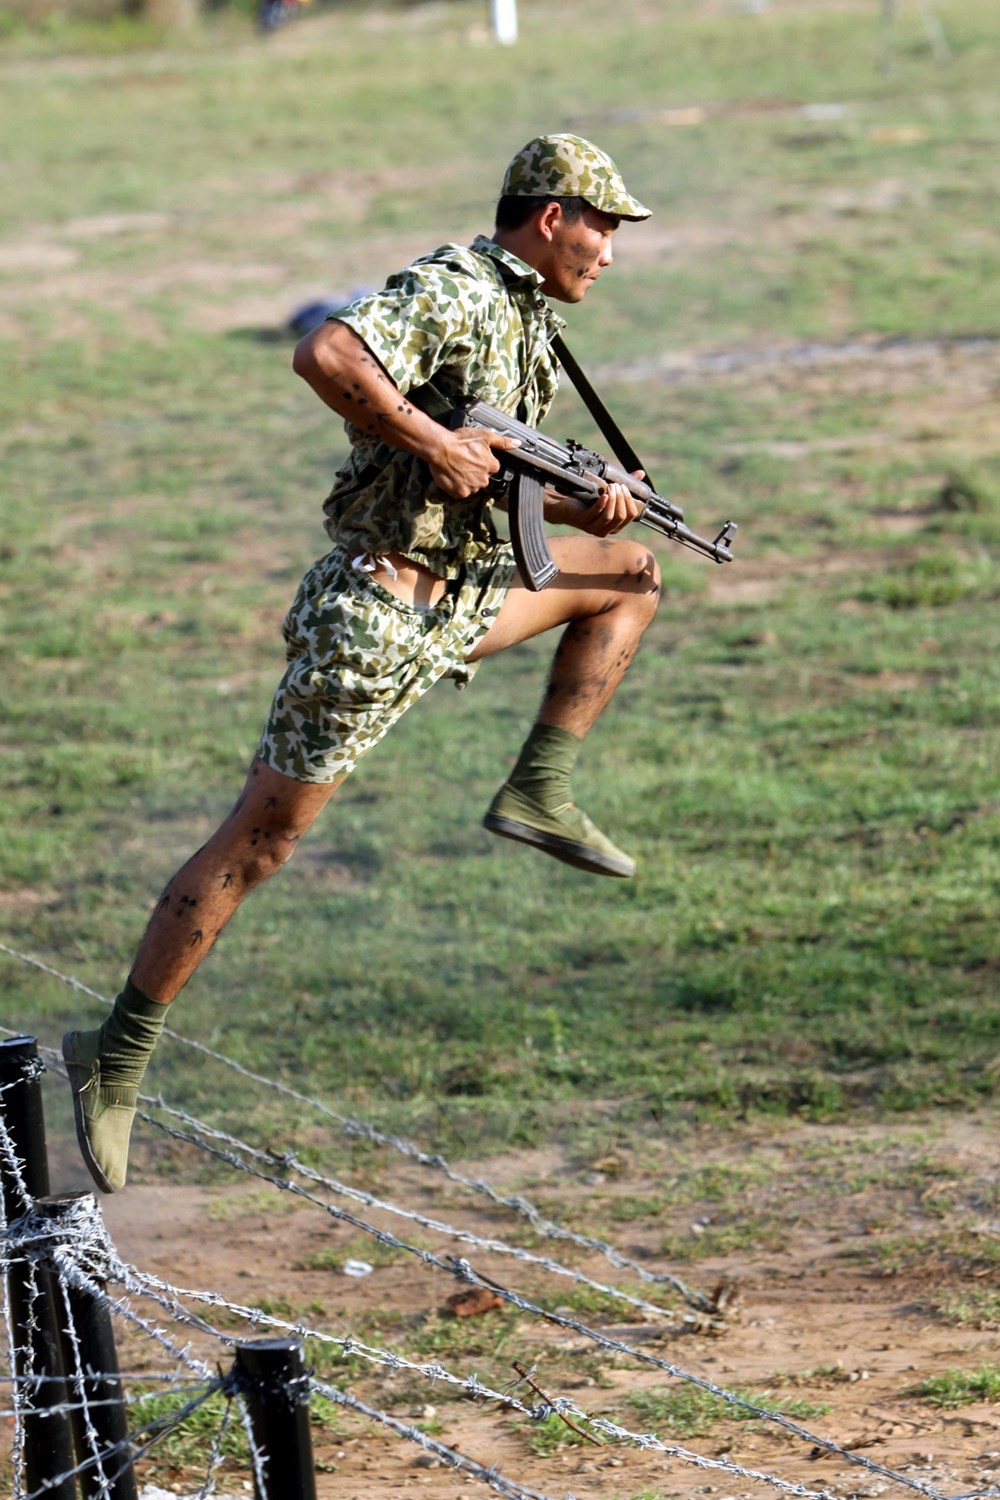 A commando shows off his skills by jumping over obstacles at integrated stadium of the 429 Commando Brigade in Phu Giao District in the southern province of Binh Duong on December 8, 2014.